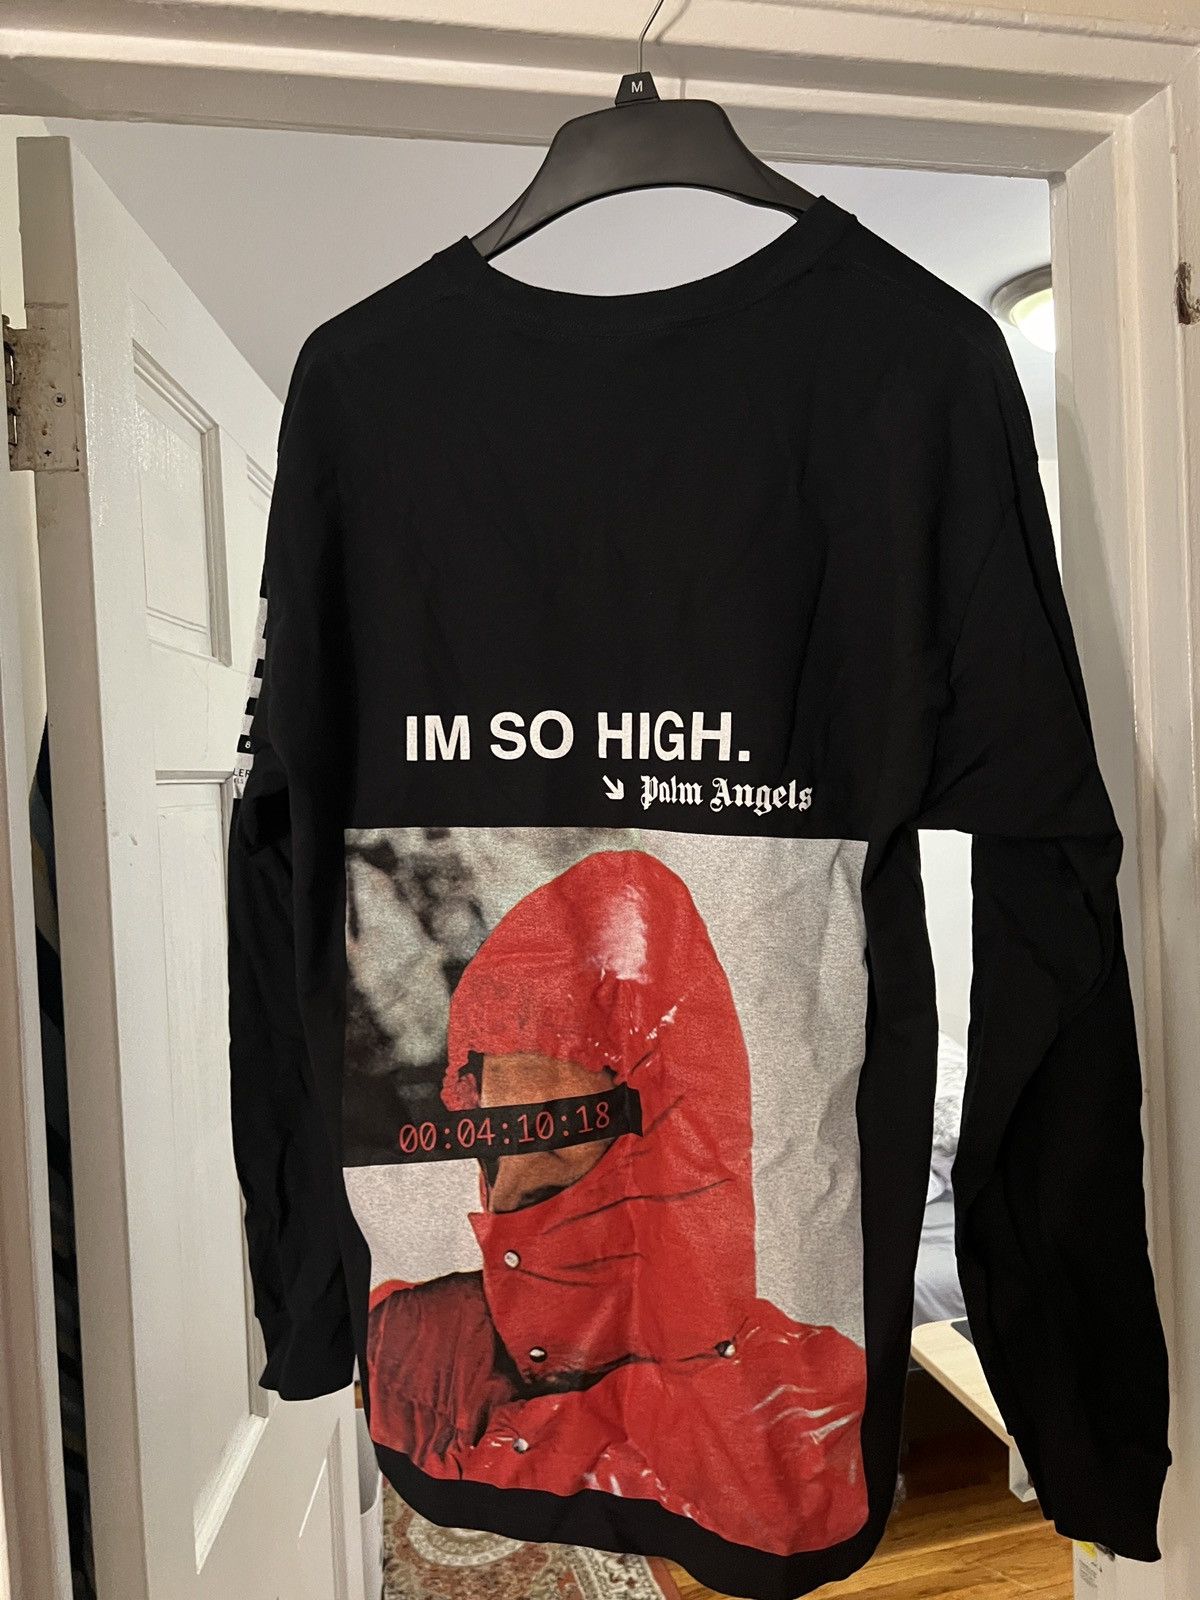 Moncler Moncler x Palm Angels IM SO HIGH LONG SLEEVE | Grailed